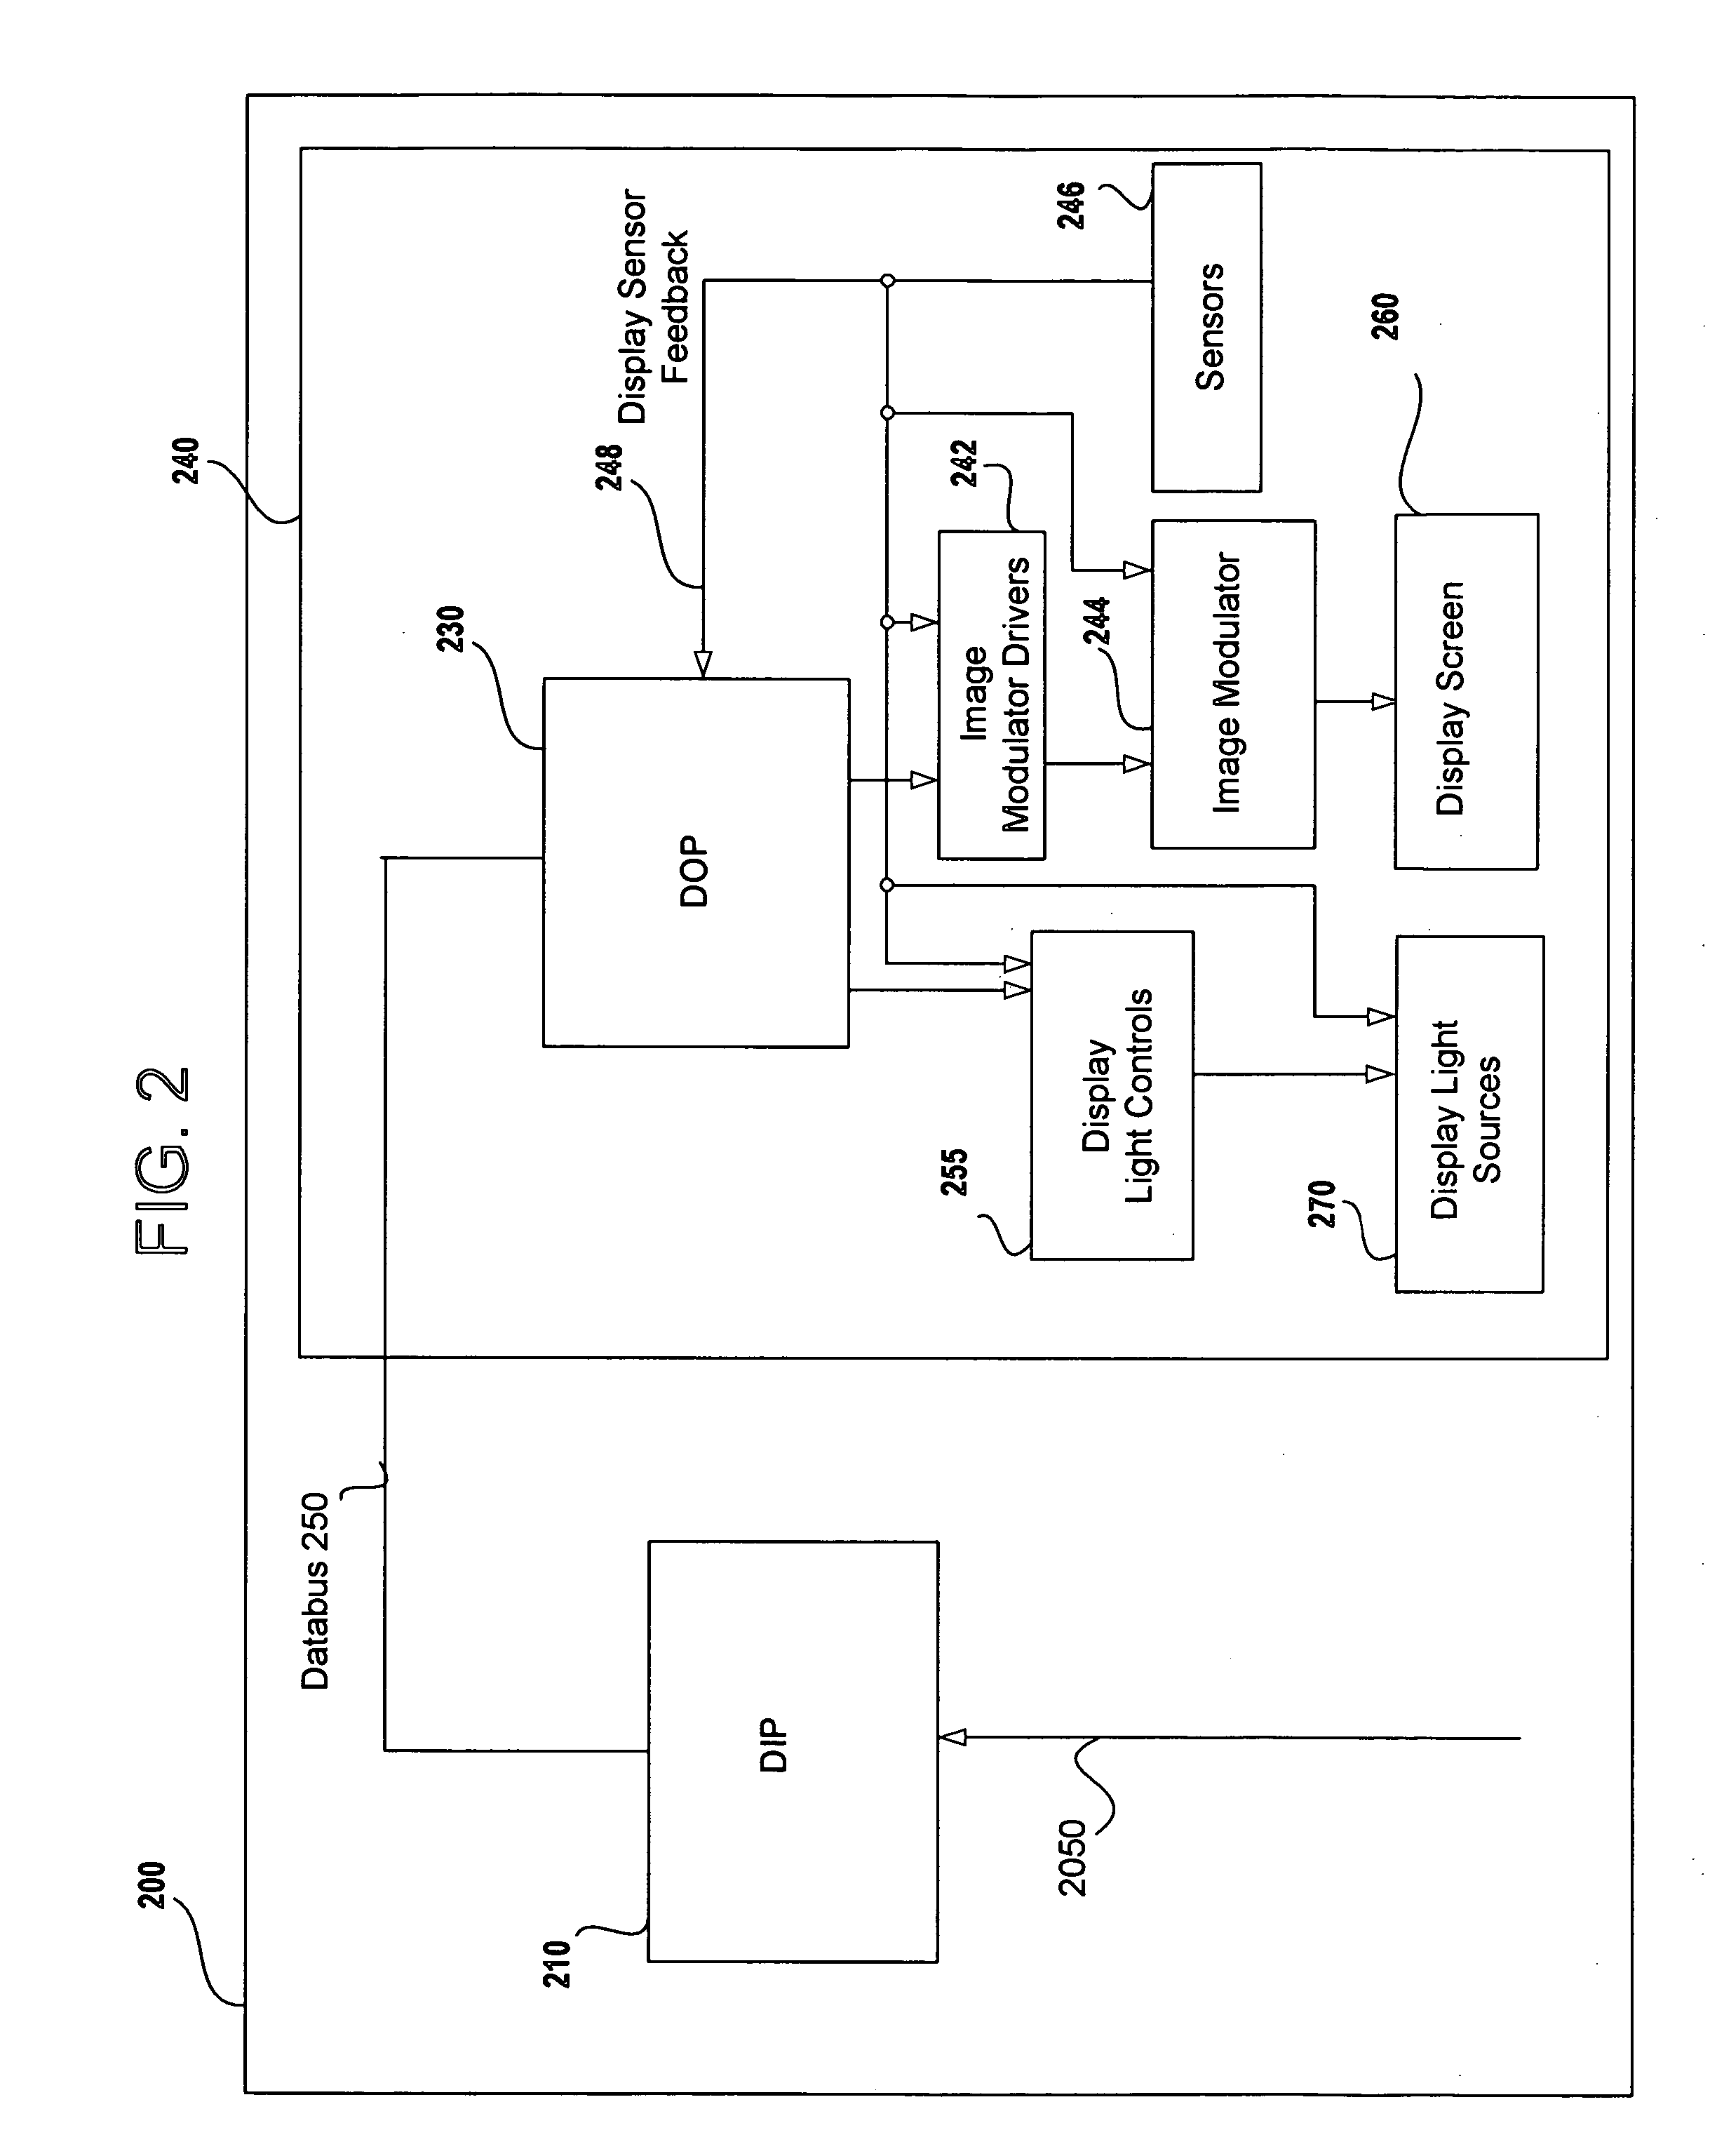 Field sequential light source modulation for a digital display system